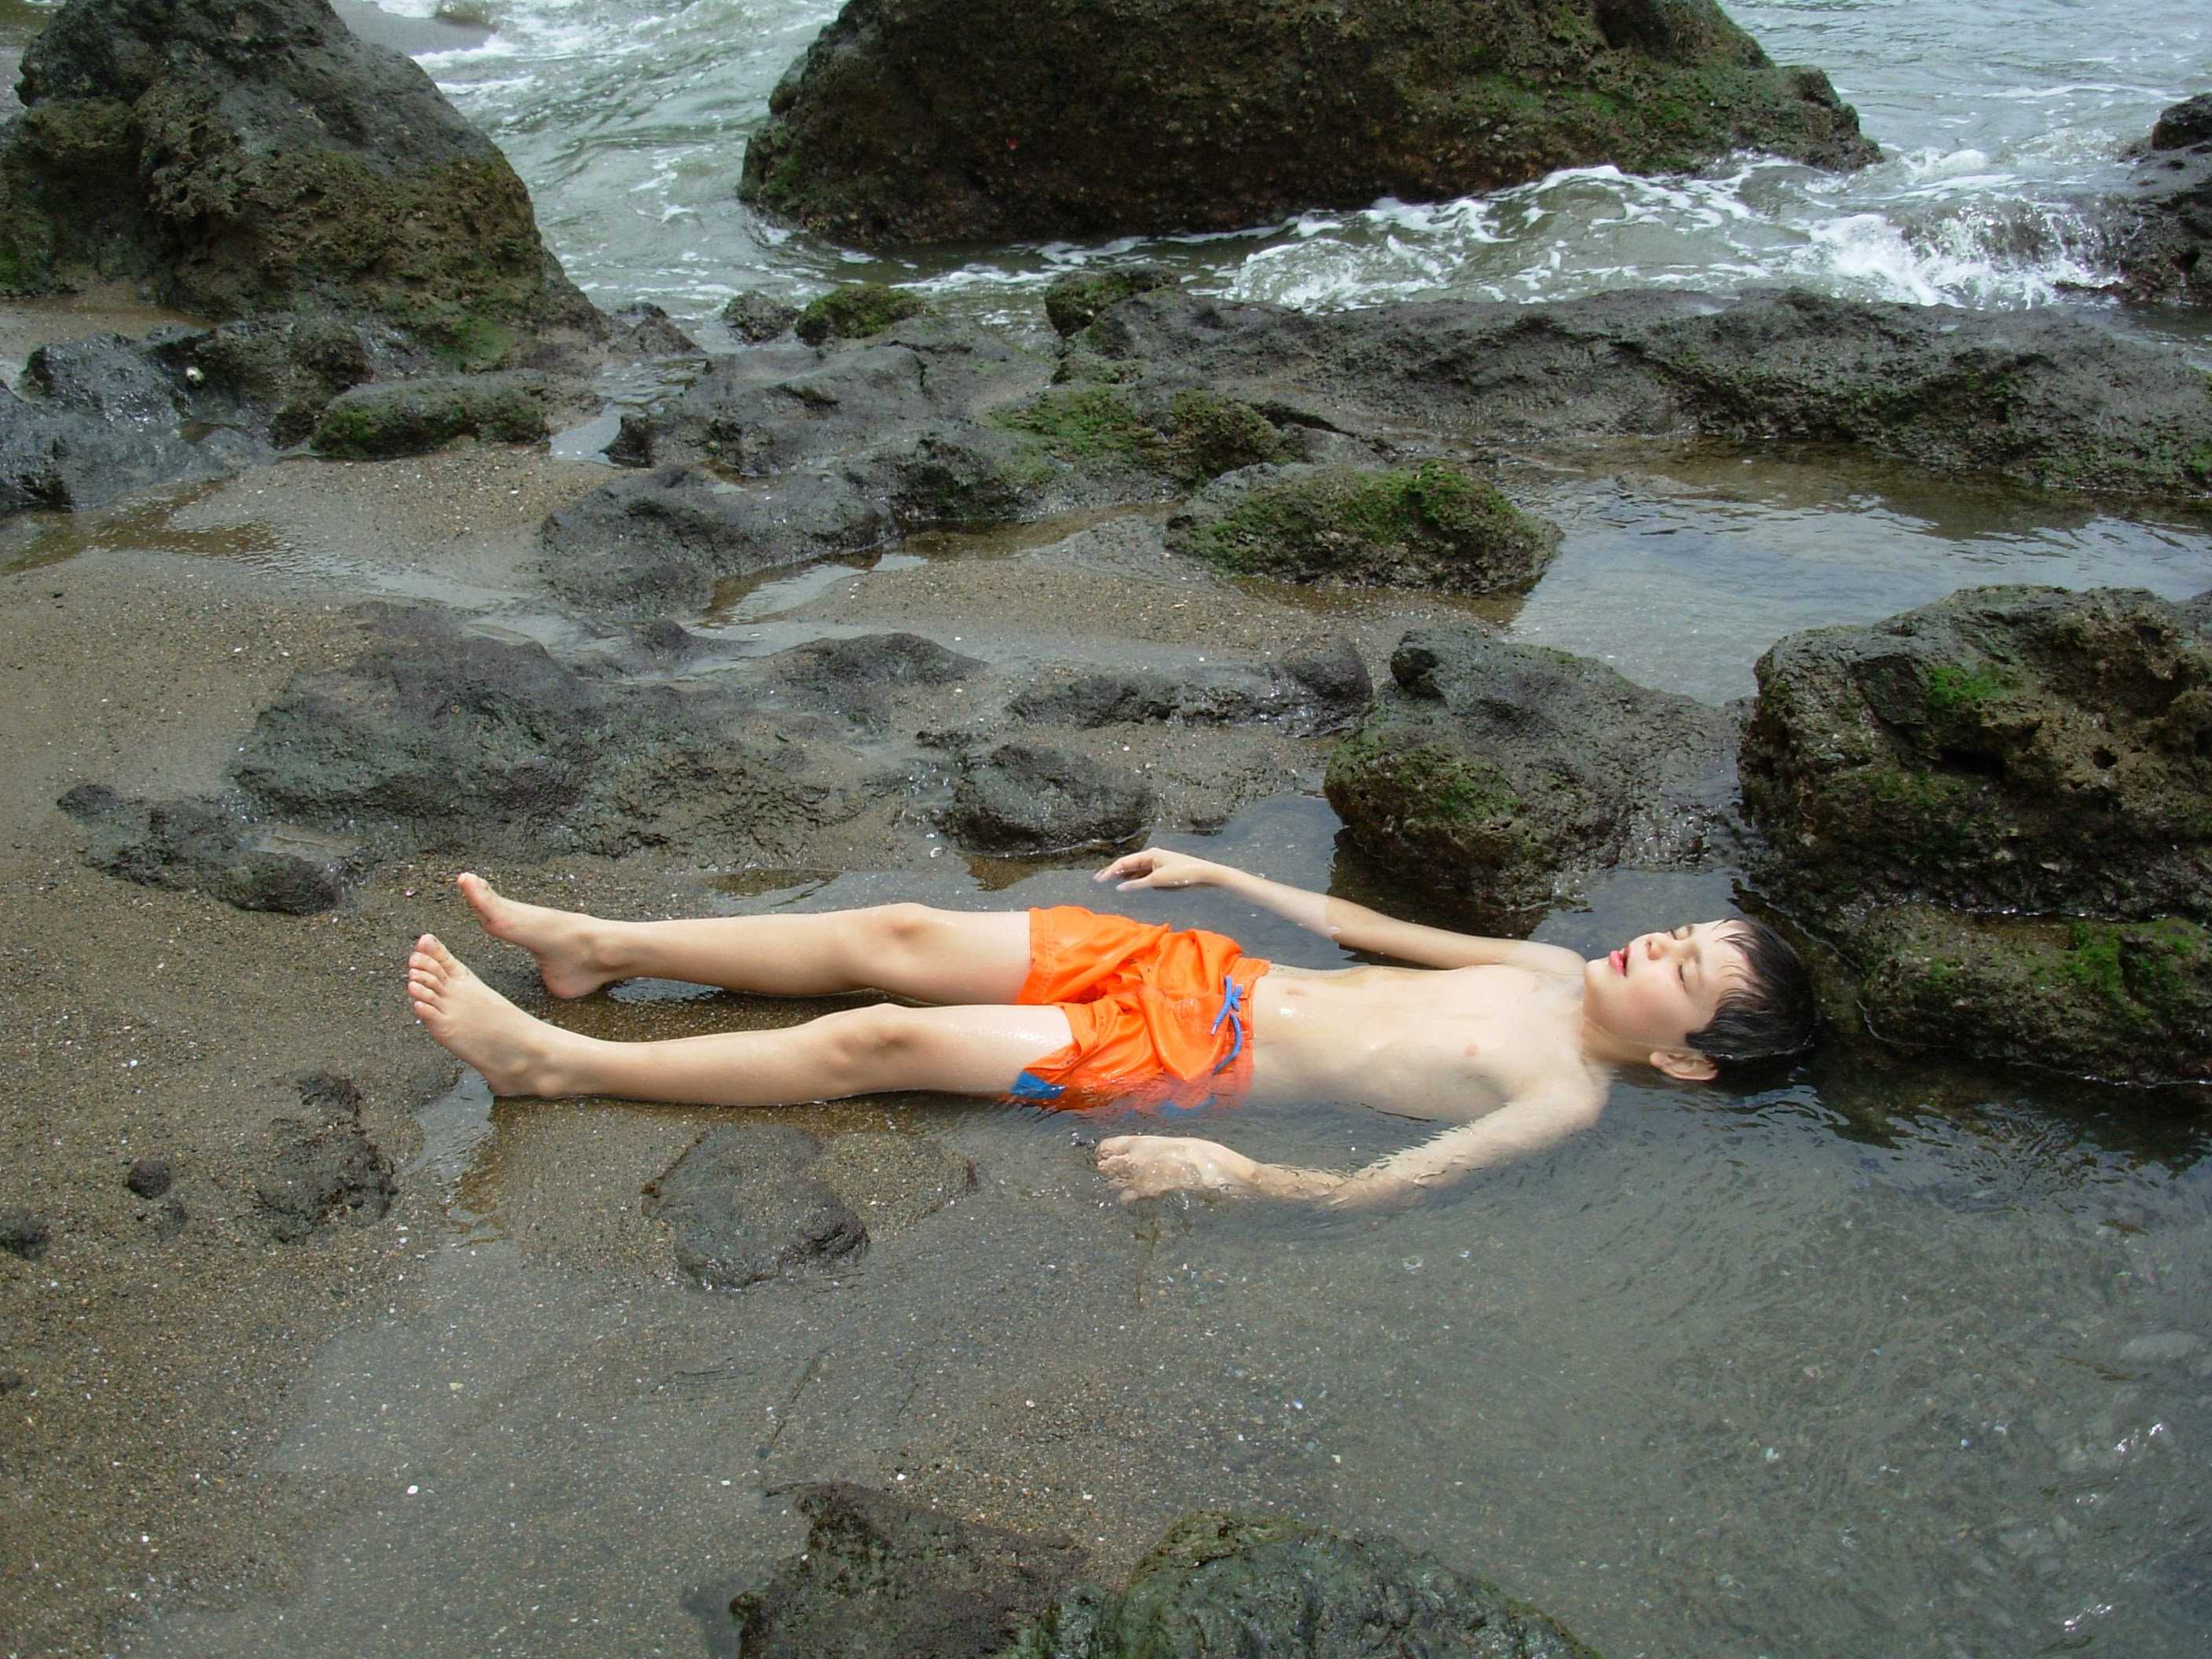 A child lying down at the beach